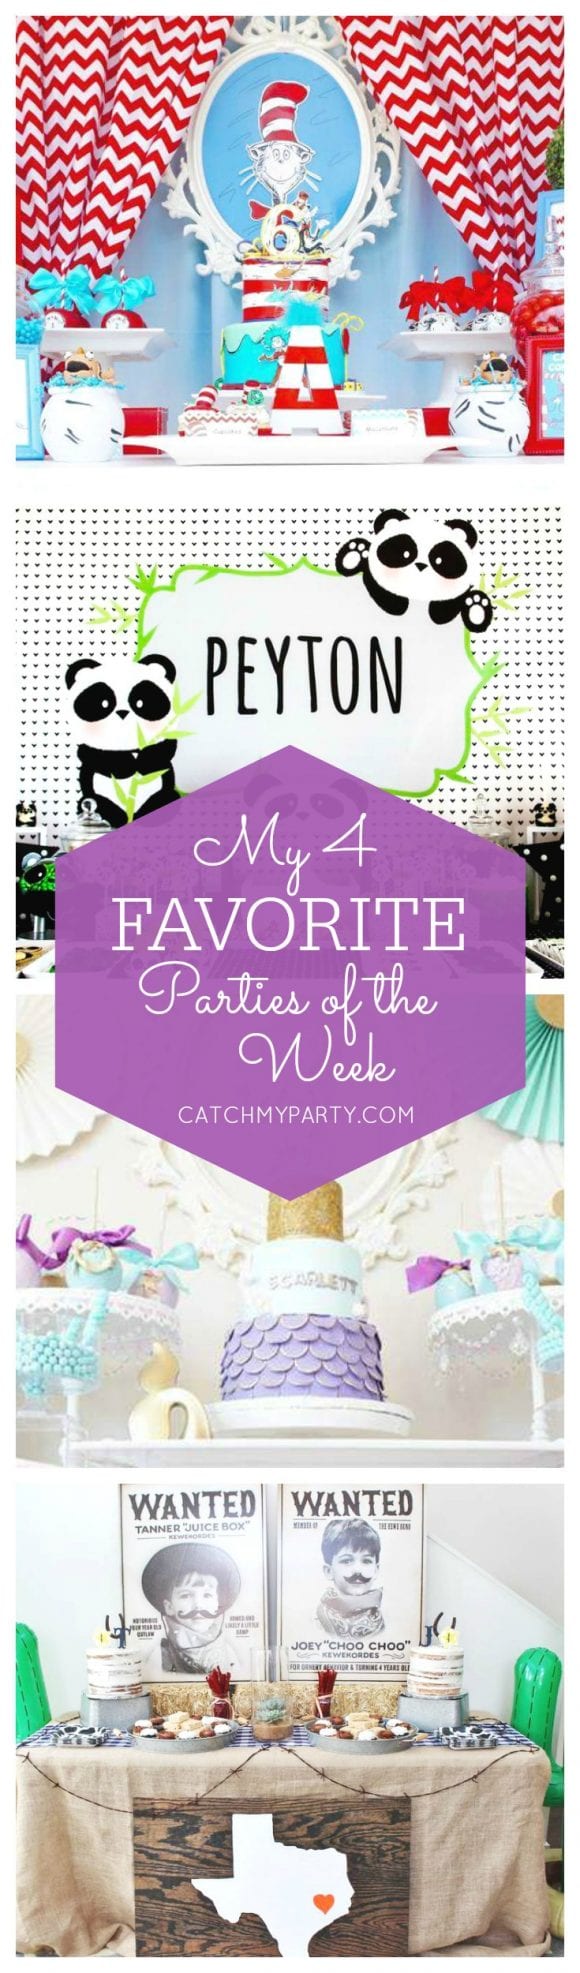 My favorite parties this week include a Dr. Seuss Birthday Party, a panda birthday party, a mermaid 1st birthday party and a western rodeo party for twins! | Catchmyparty.com